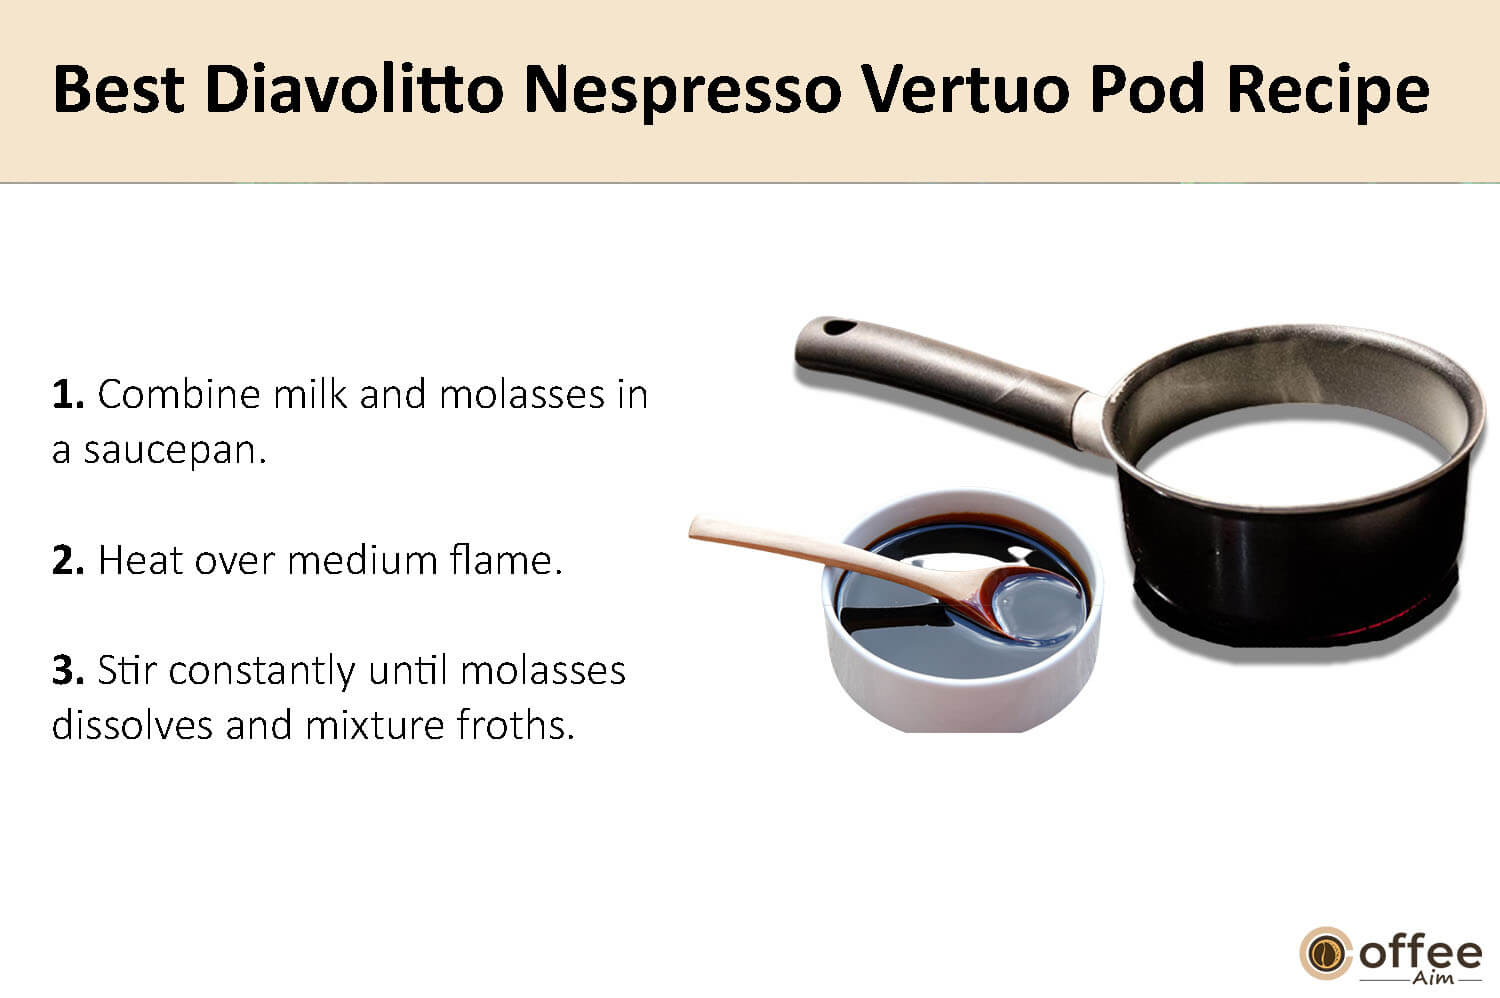 In this image, I clarify the preparation instructions for crafting the finest Diavolitto Nespresso Vertuo coffee pod.